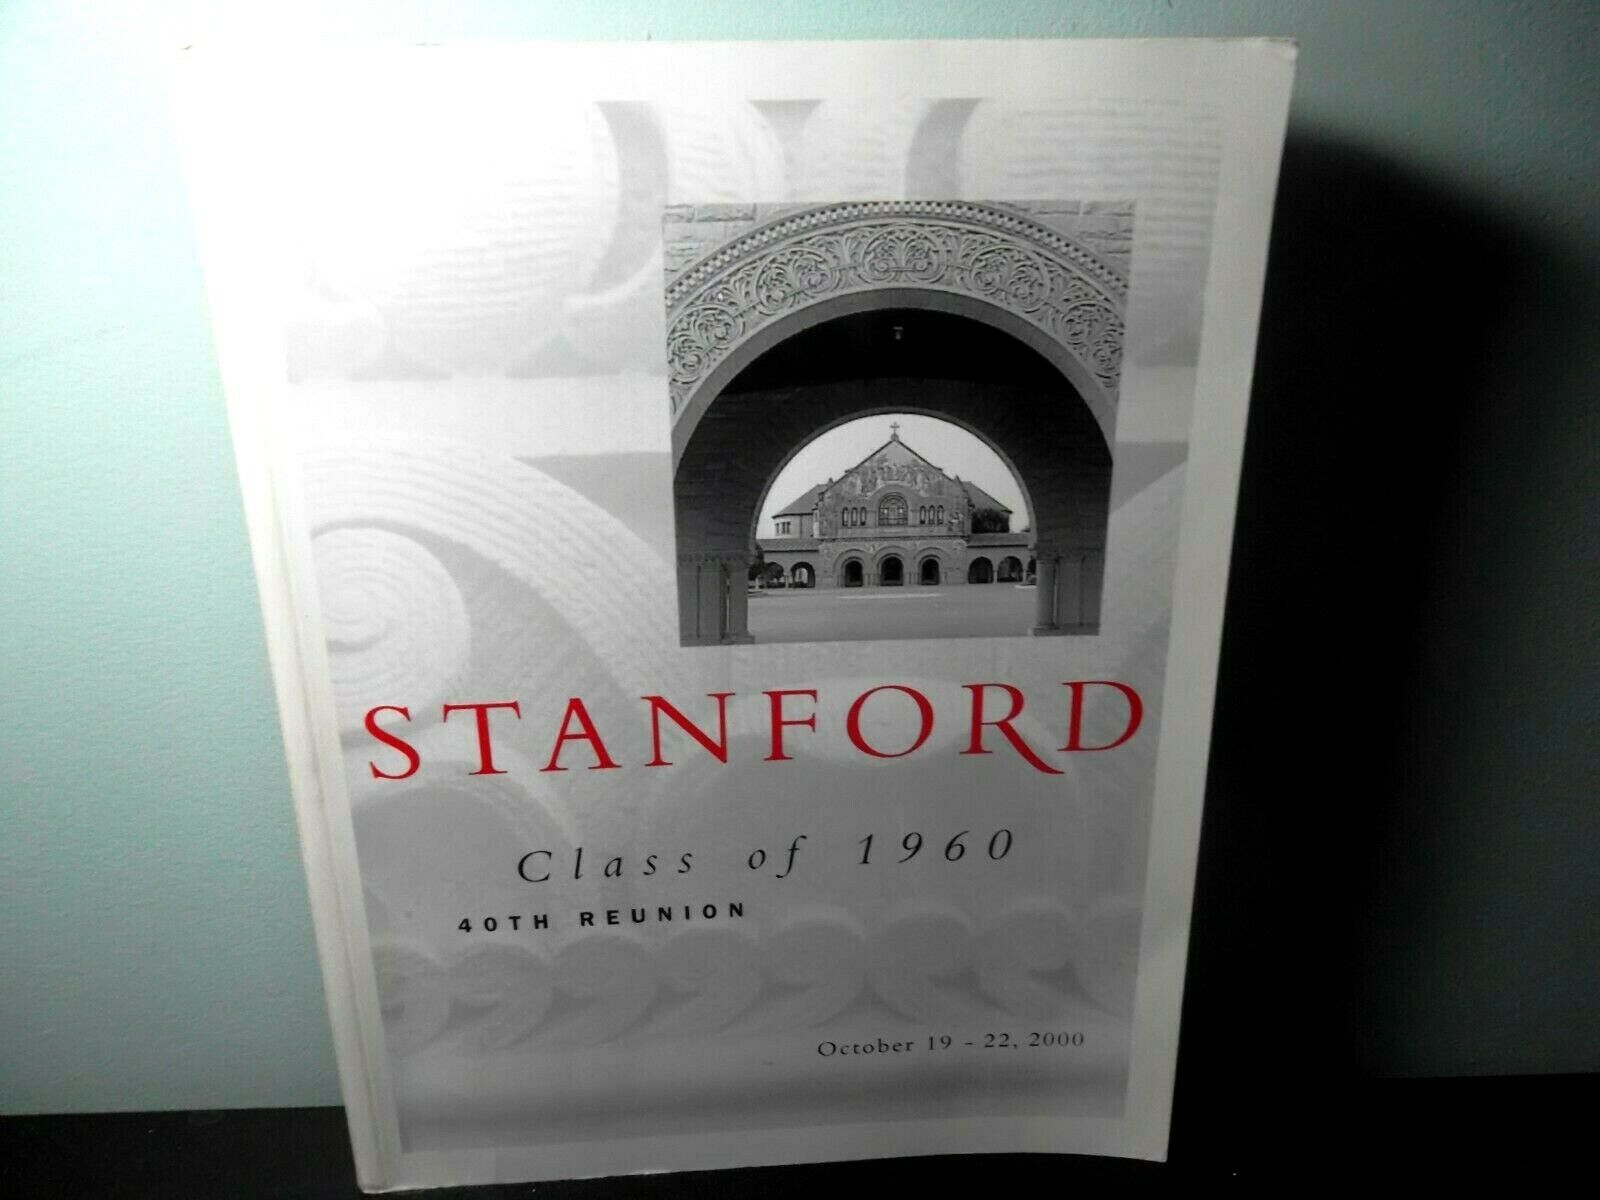 Stanford; Class of 1960 40th Reunion (October 19-22, 2000)